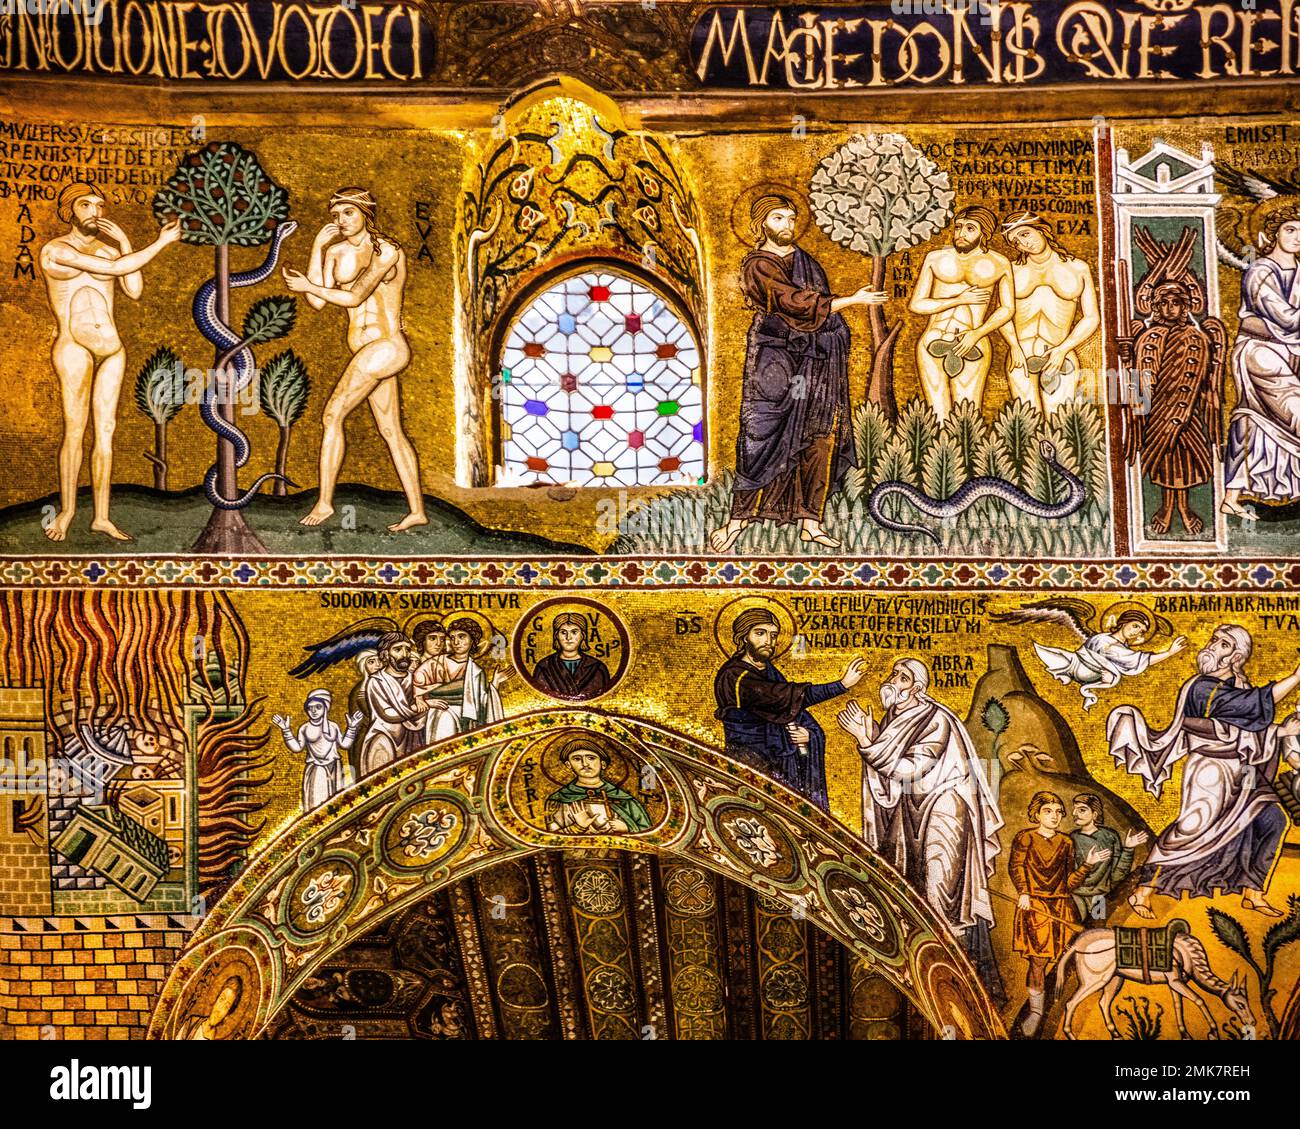 Adam and Eve and the Tree of Knowledge, Creation Story, elaborate gold mosaics with episodes from the Old and New Testatment, Norman Palace with the Stock Photo